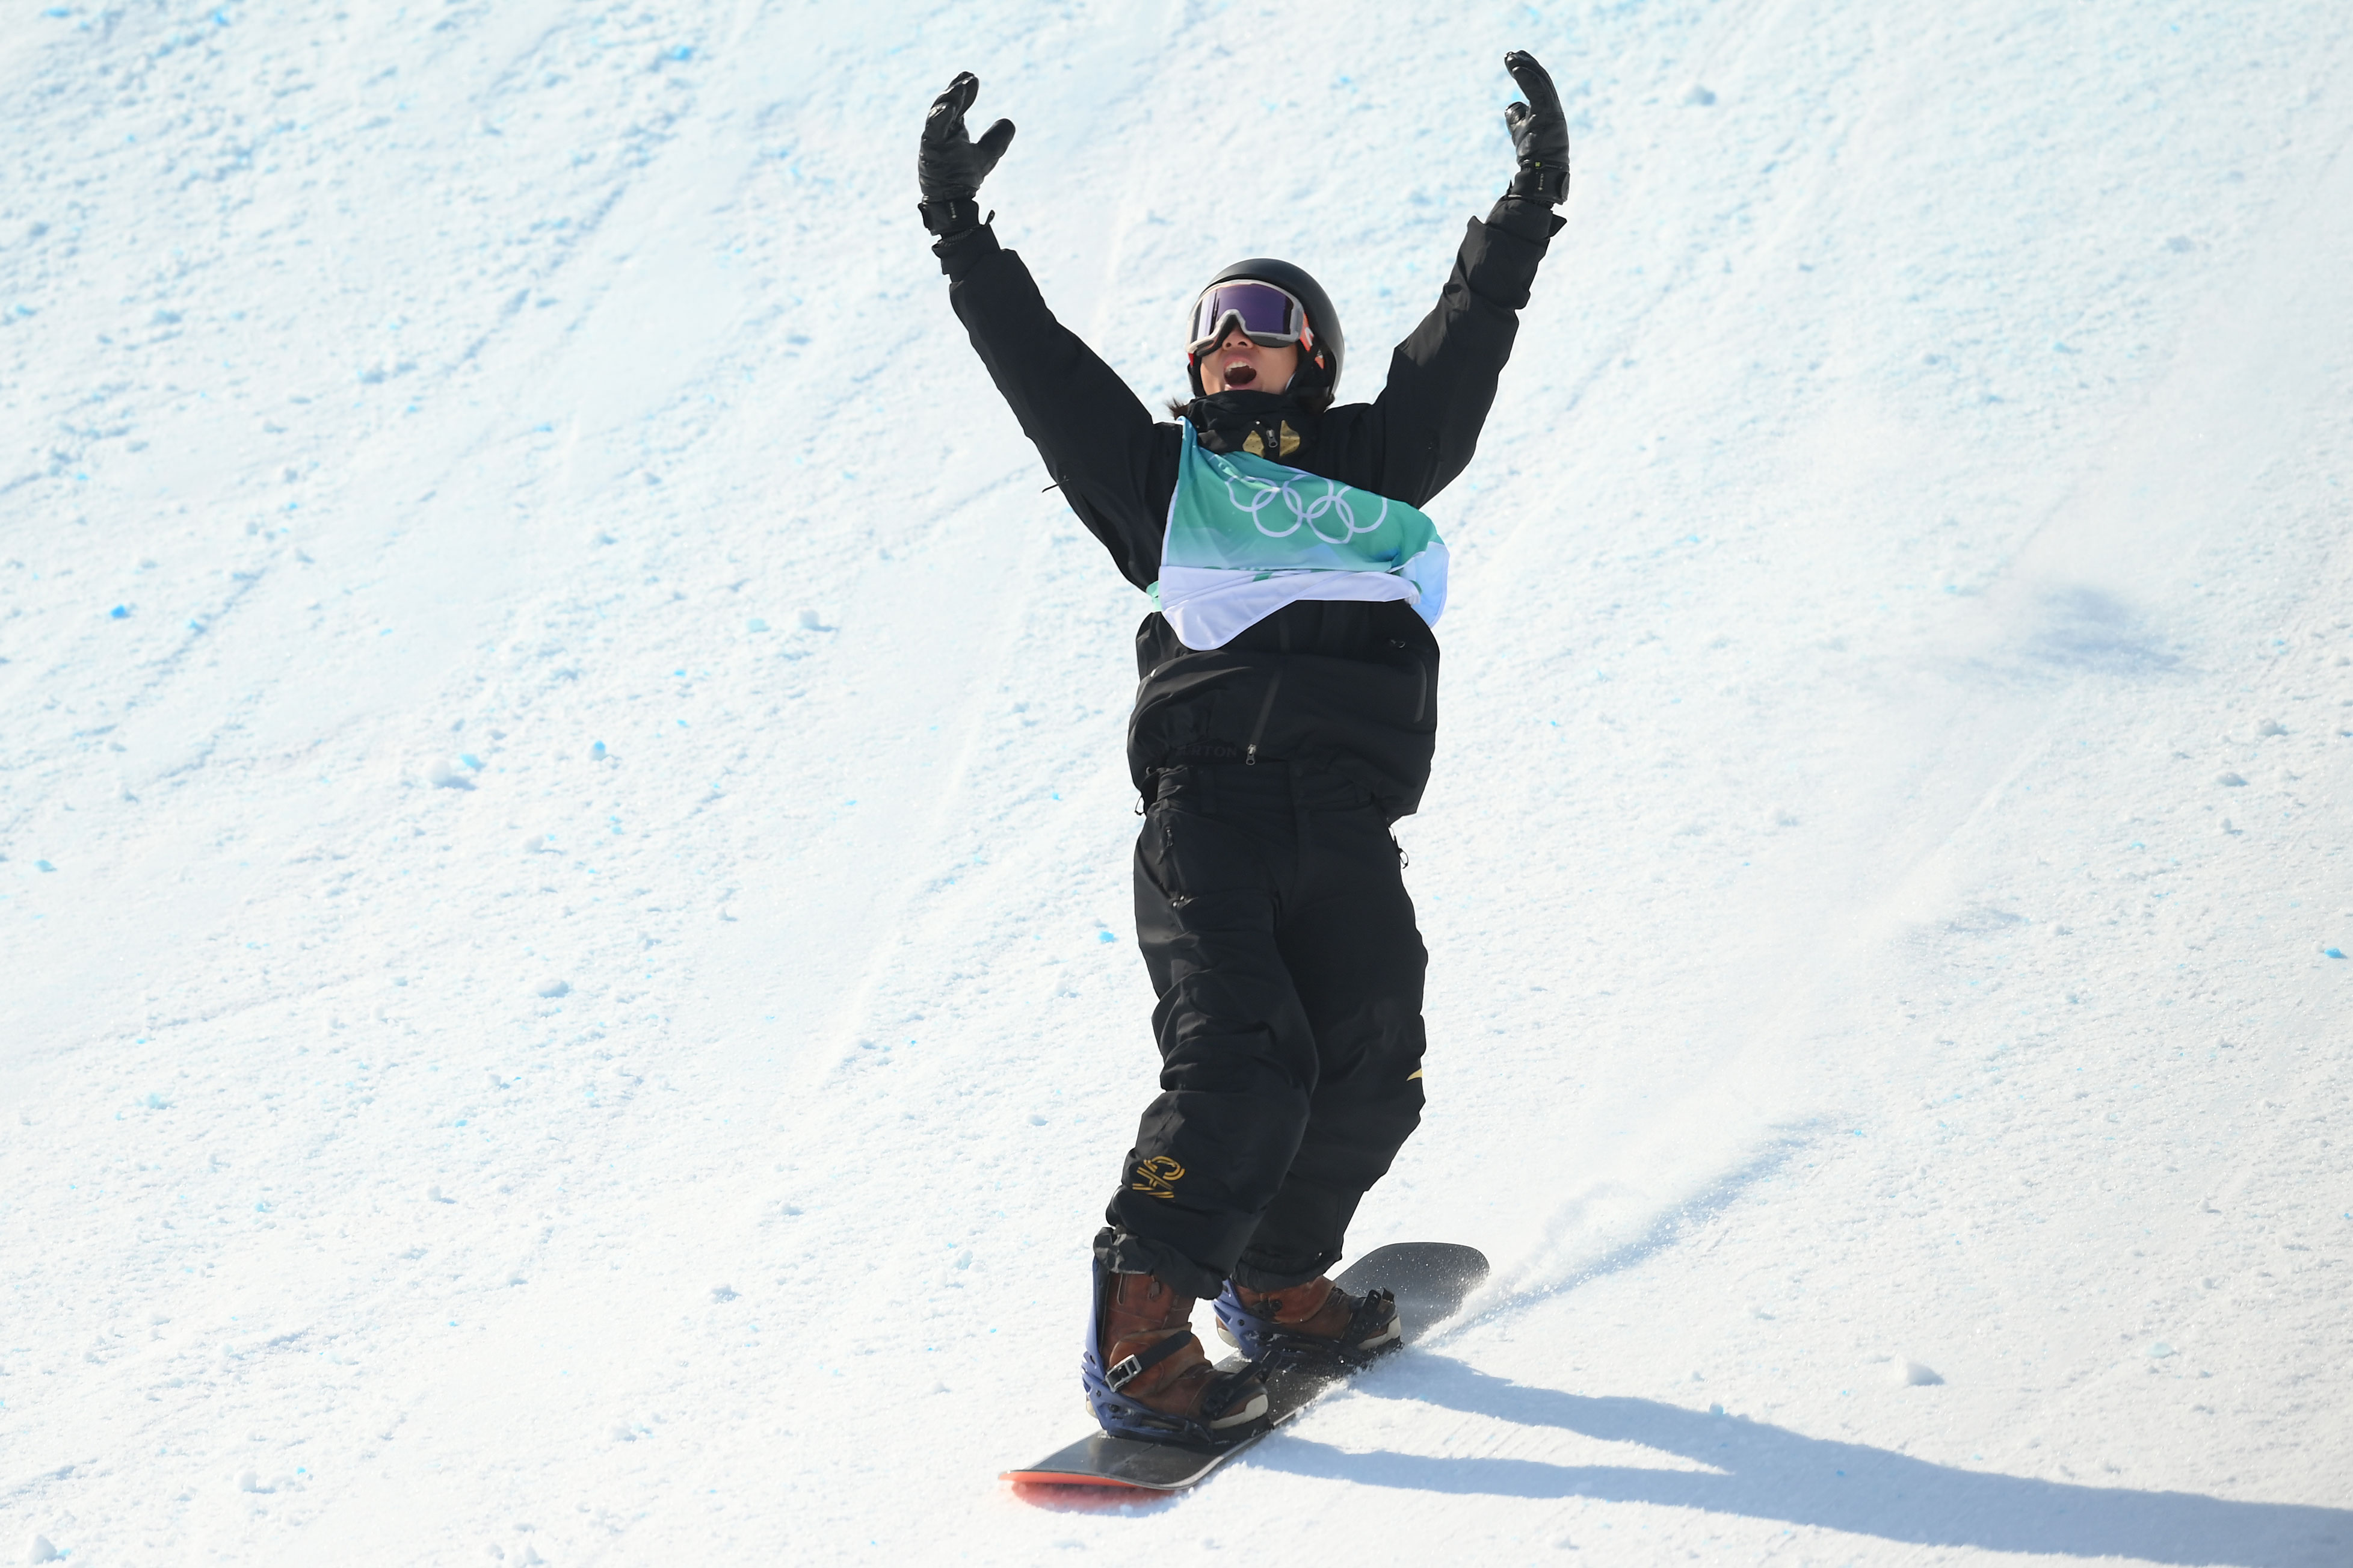 Su Yiming celebrates after his gold medal run at the men's snowboard big air final on Tuesday.